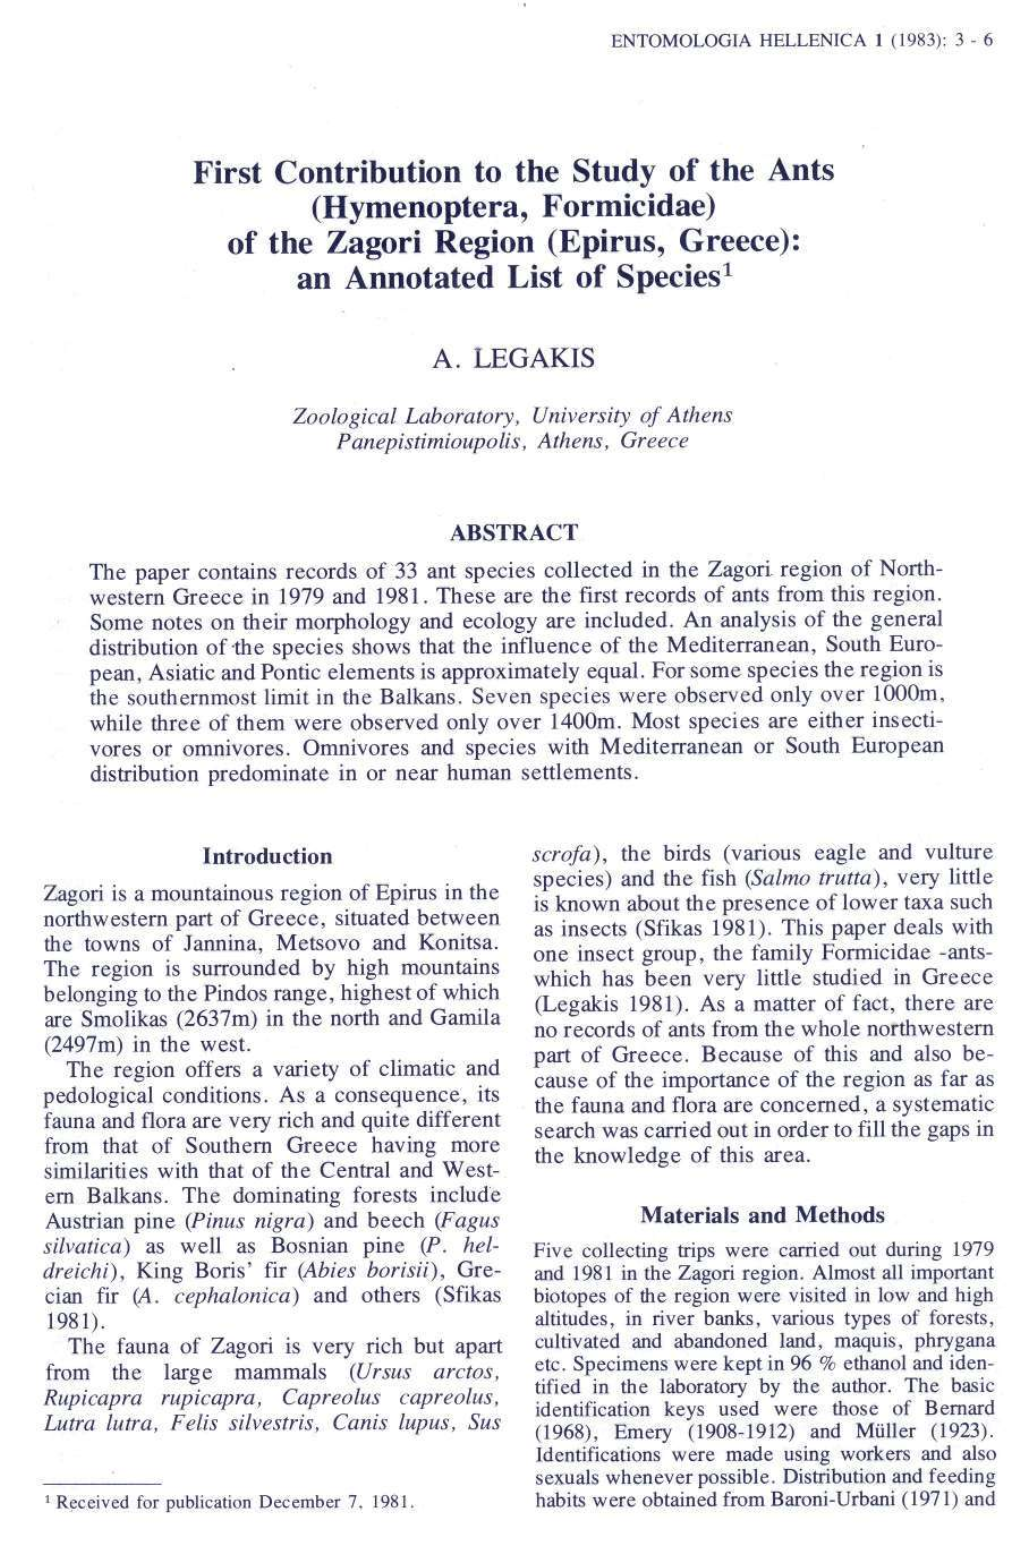 Epirus, Greece): an Annotated List of Species1